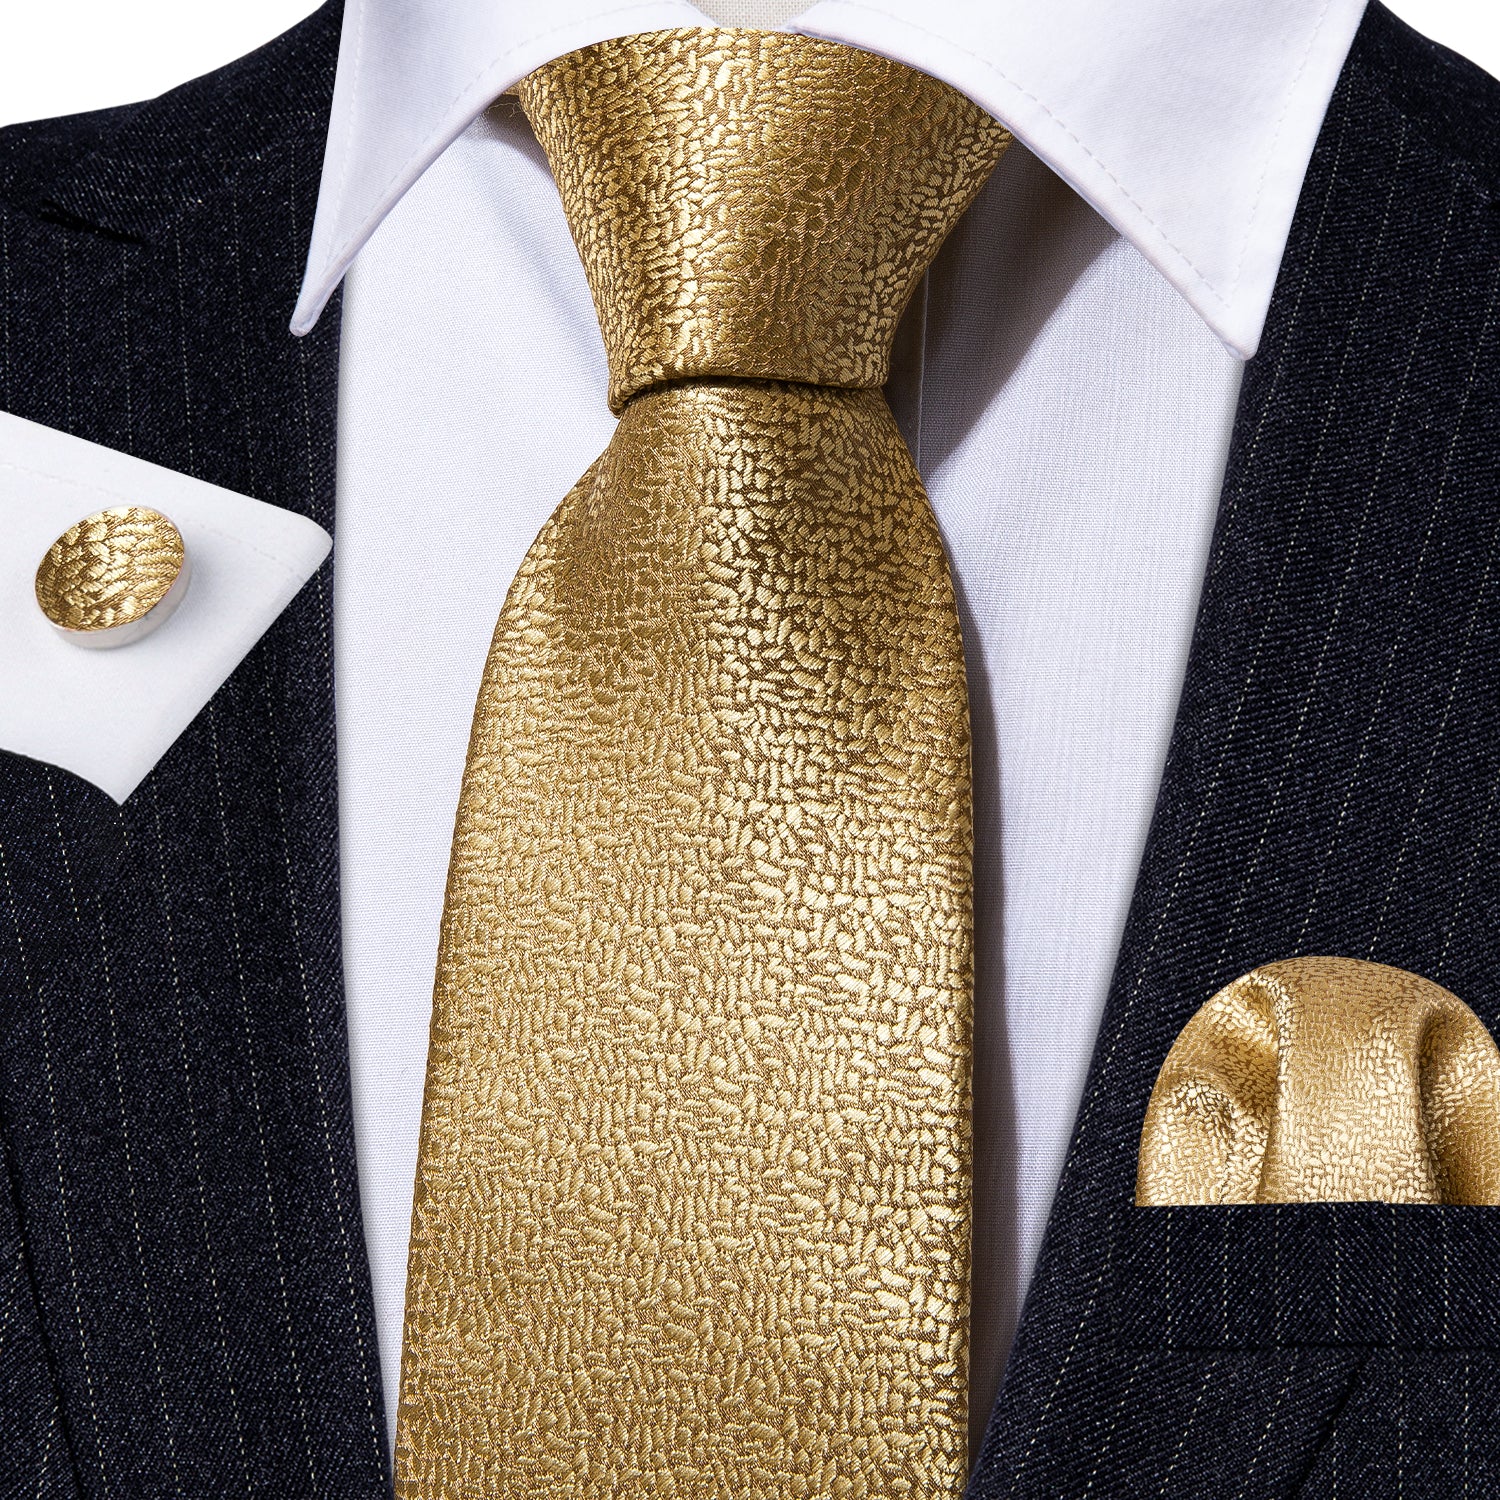 Barry.wang Gold Tie Champagne Solid Tie Pocket Square Cufflinks Set